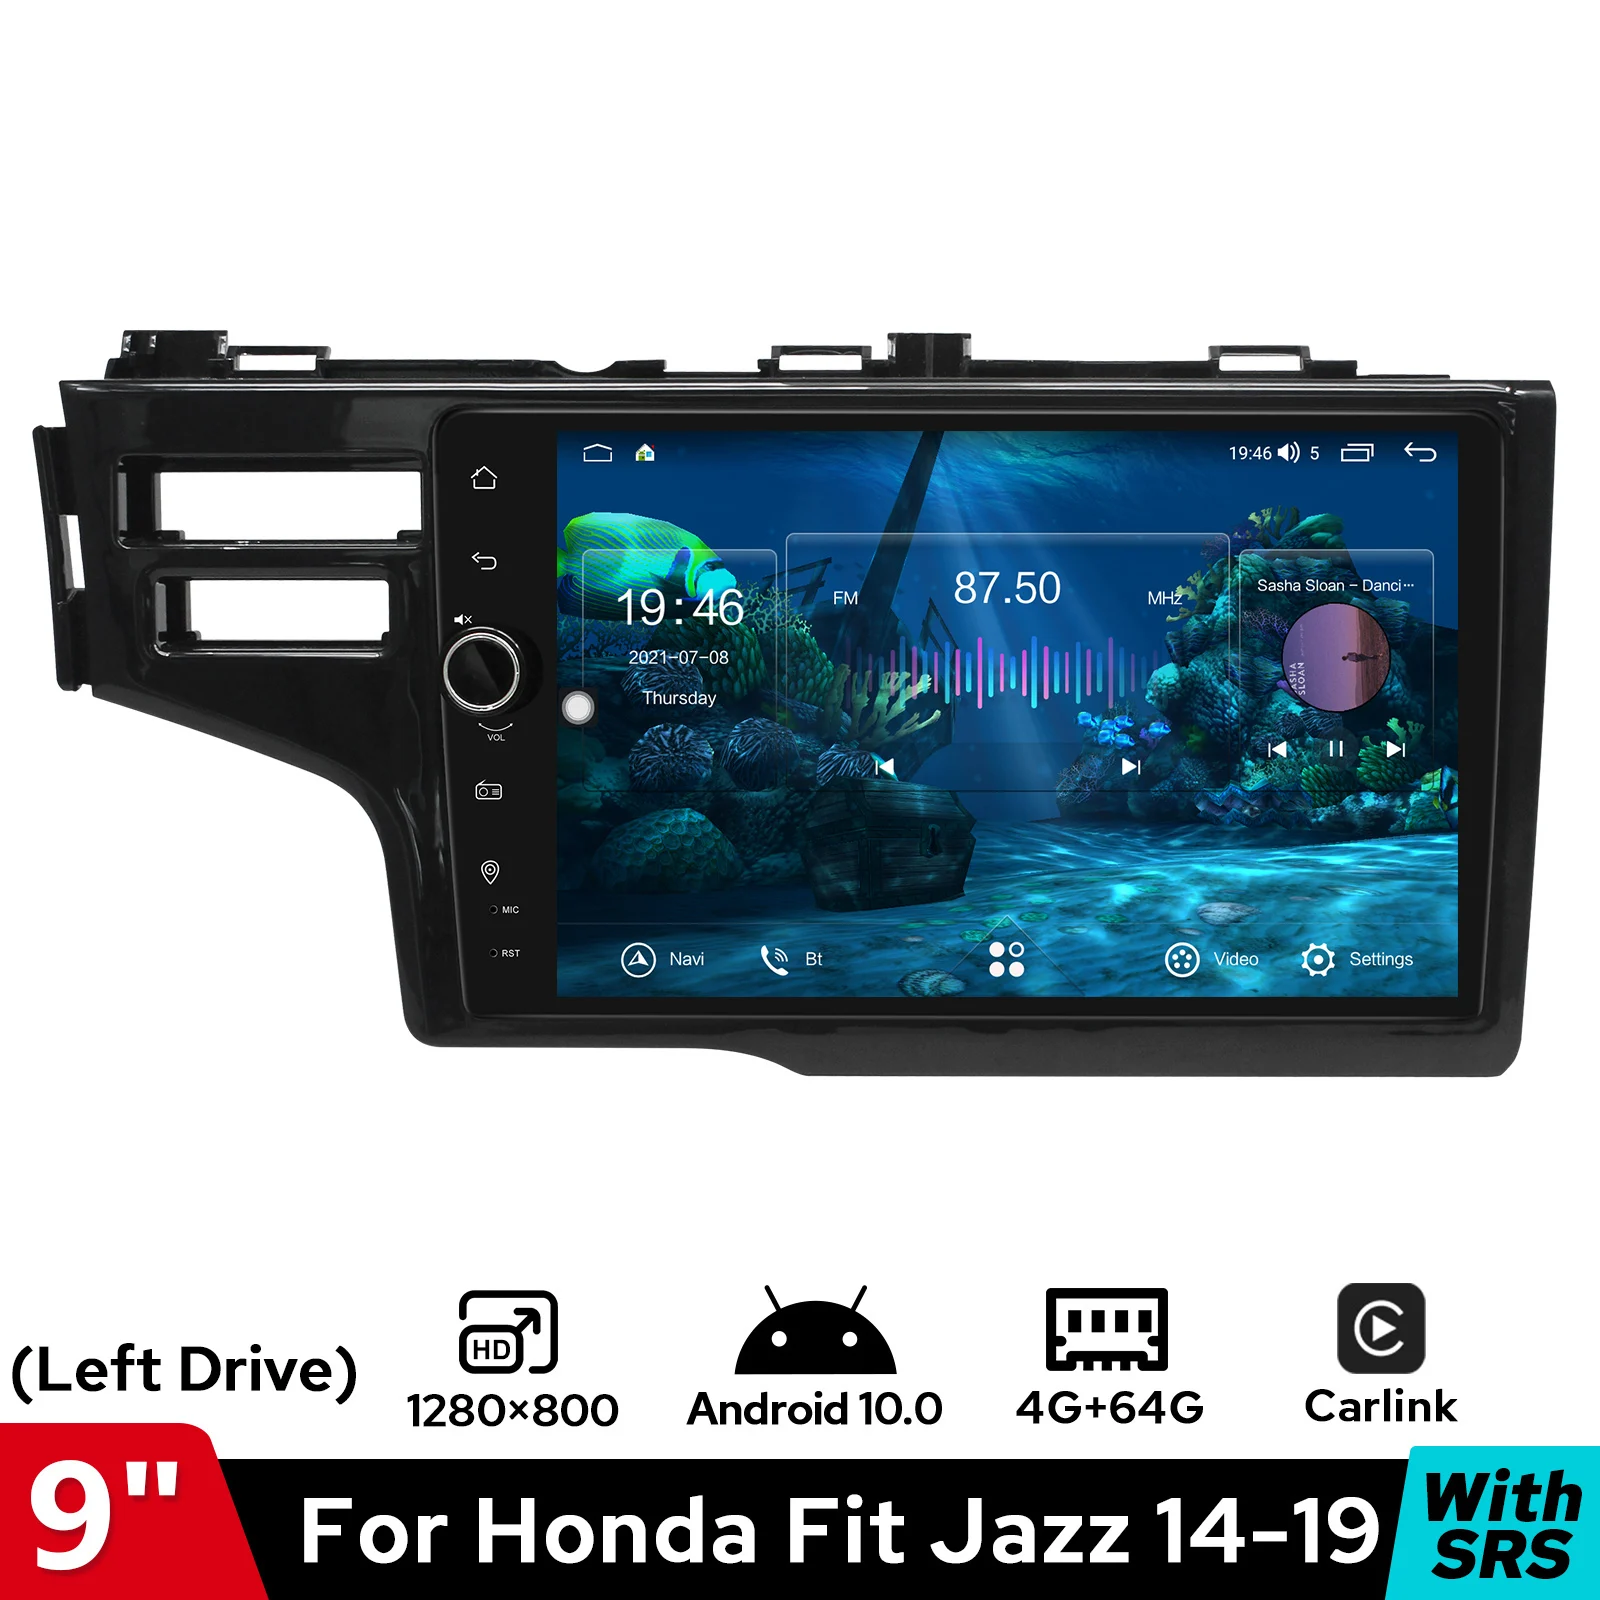 

Android Car Radio Stereo Bluetooth Subwoofer Microphone 9” Head Unit Wireless Carplay GPS For Honda Fit Jazz 2014-2019 With SRS